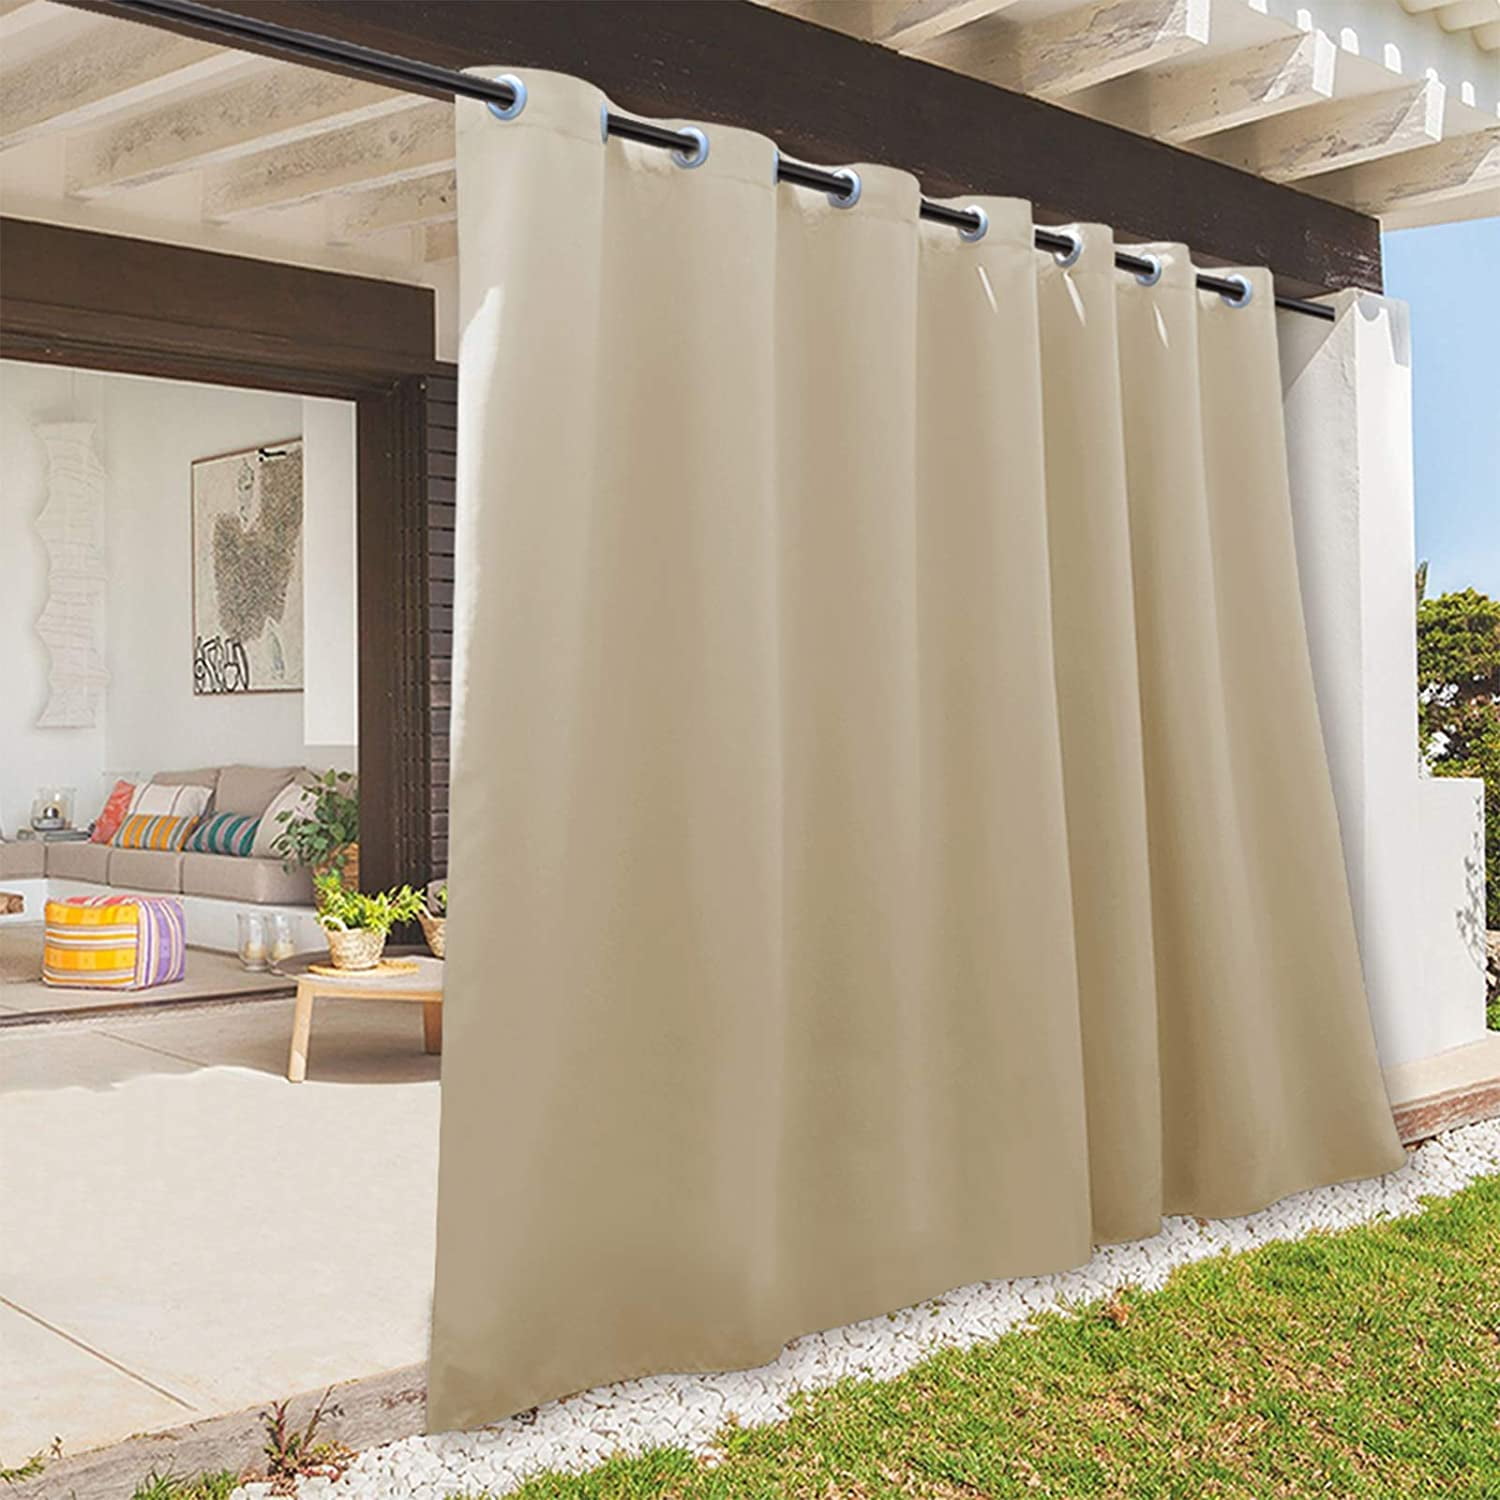 StangH Indoor Outdoor Privacy Curtain 1 Panel Cream Beige 100 Width Outside Decor Summer Heat & Sun UV Block Out Porch Curtain Wind & Water Proof for Gazebo/Patio W100 x L95-inch